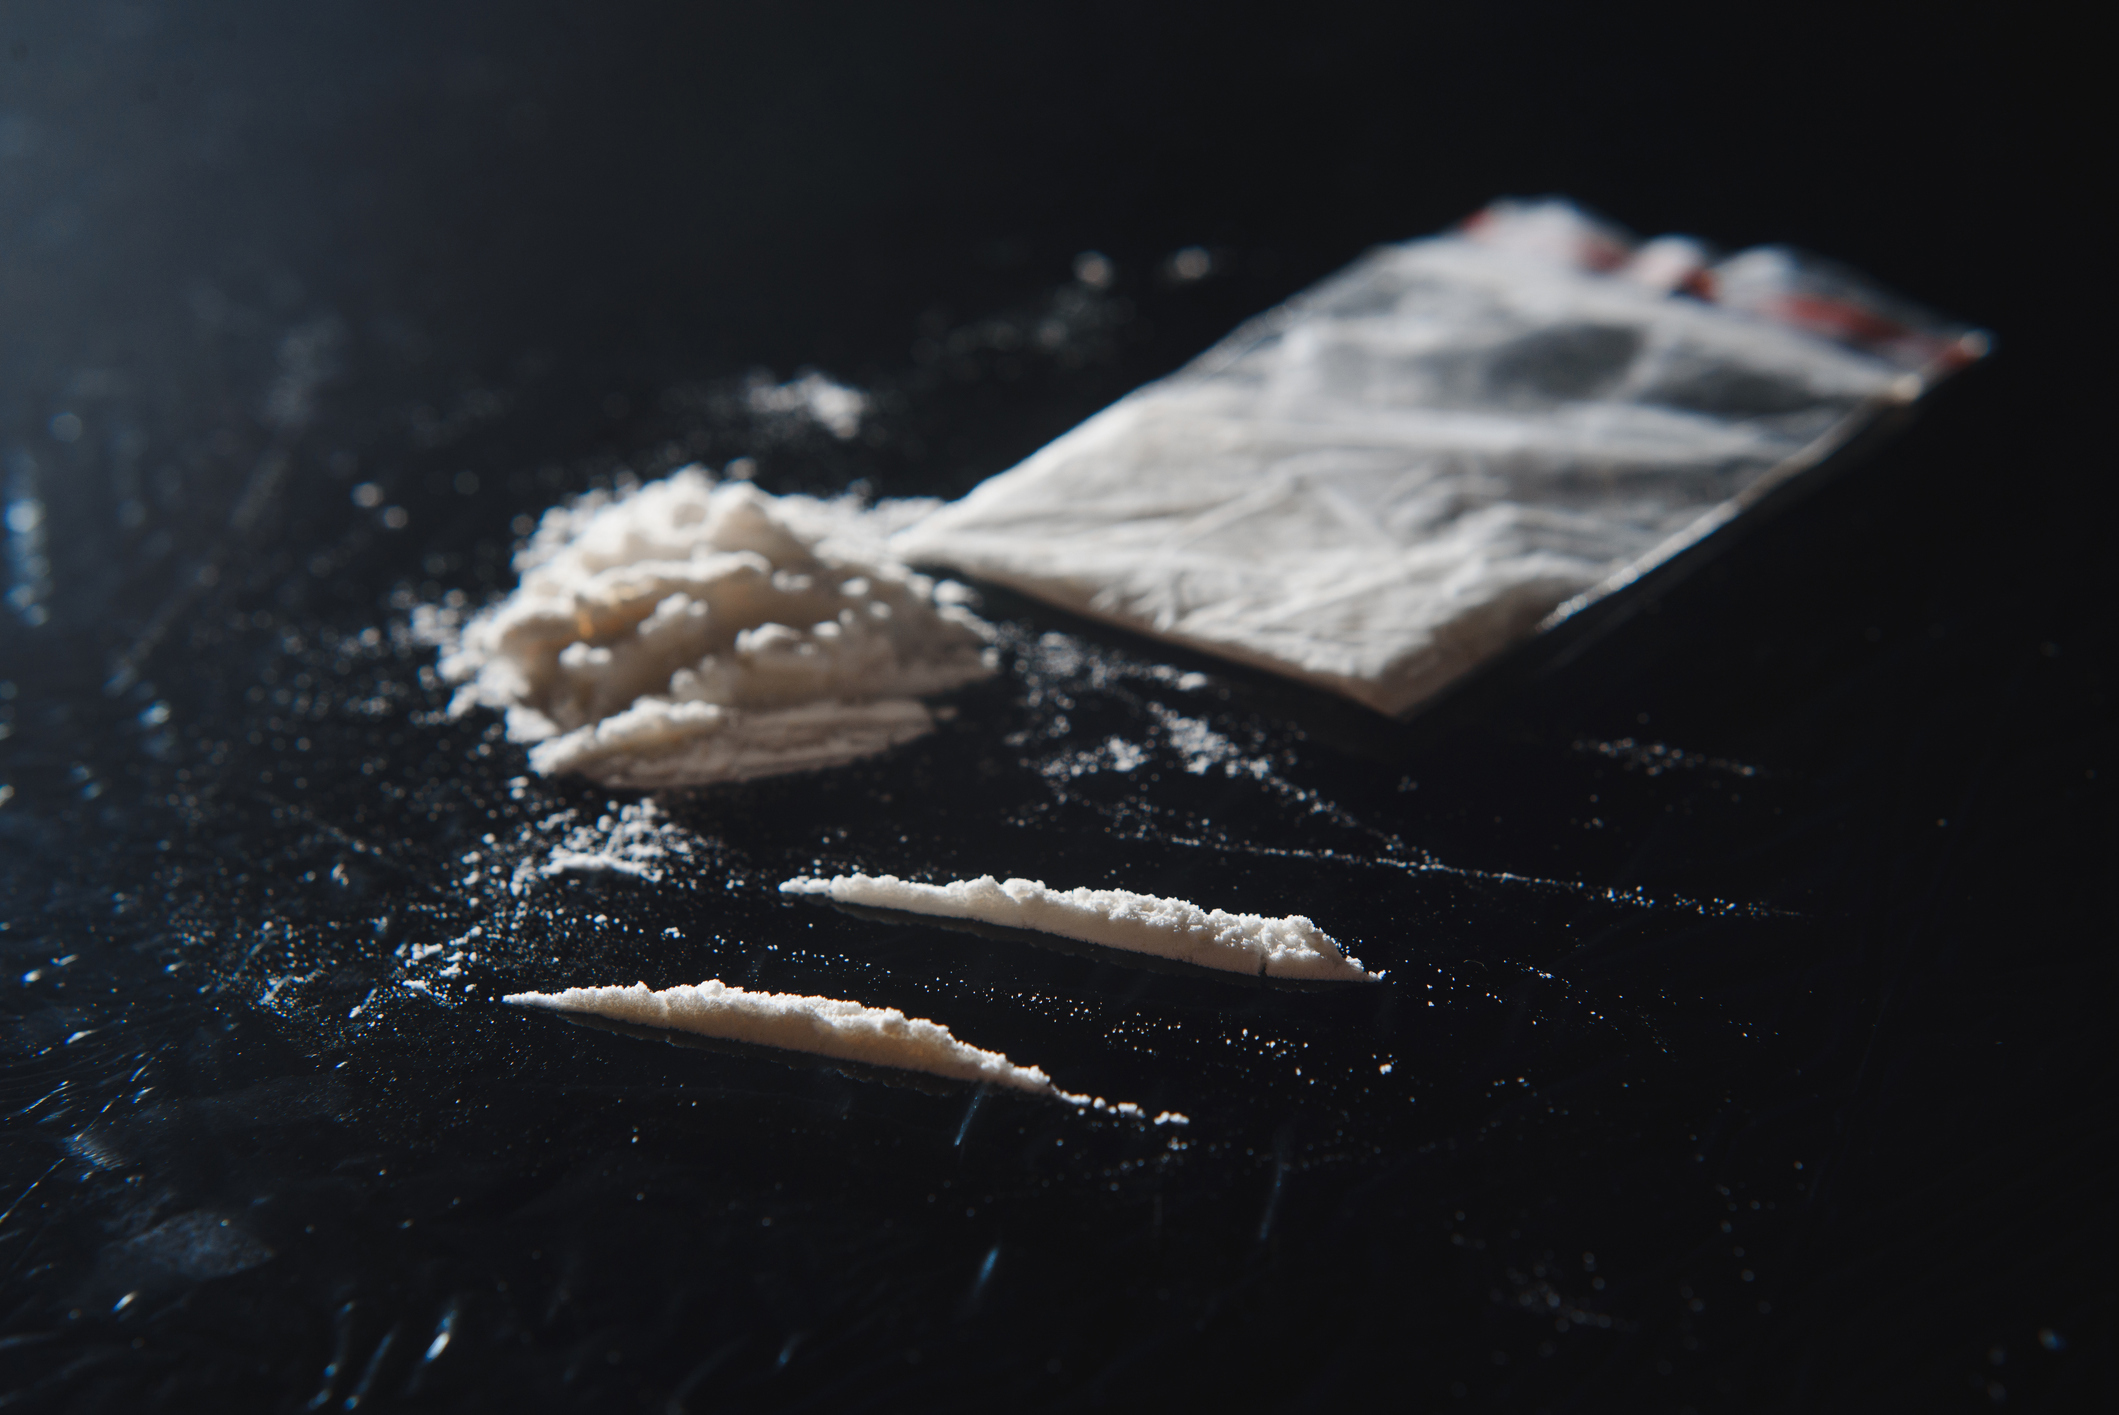 There have been recent serious harms in Melbourne associated with a white powder sold as cocaine.